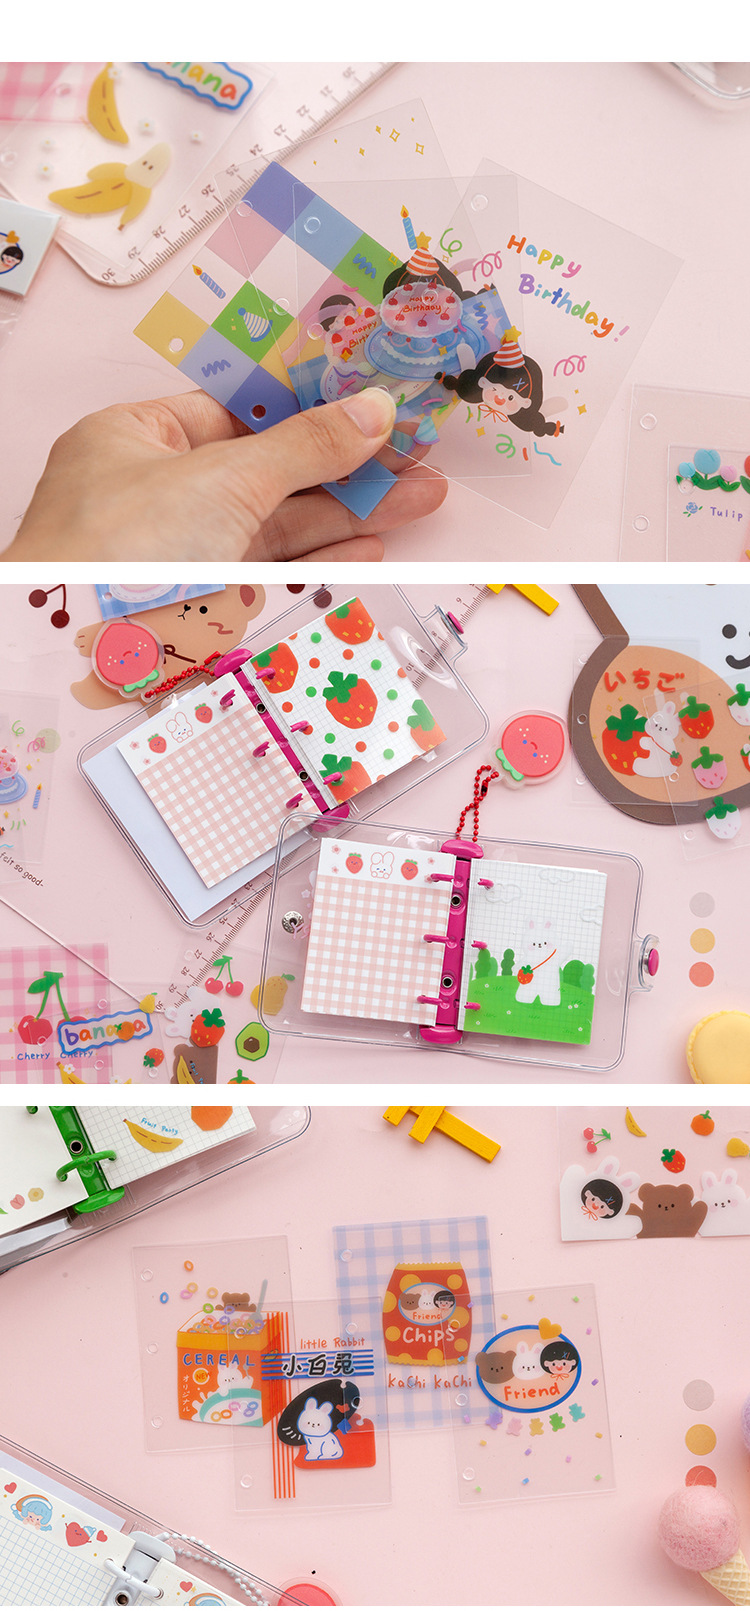 Life Fun Series 4pcs PVC Kawii 3-hole mini book separator Notebook Spiral Binder Index Page Dividers Diary Book Stationery